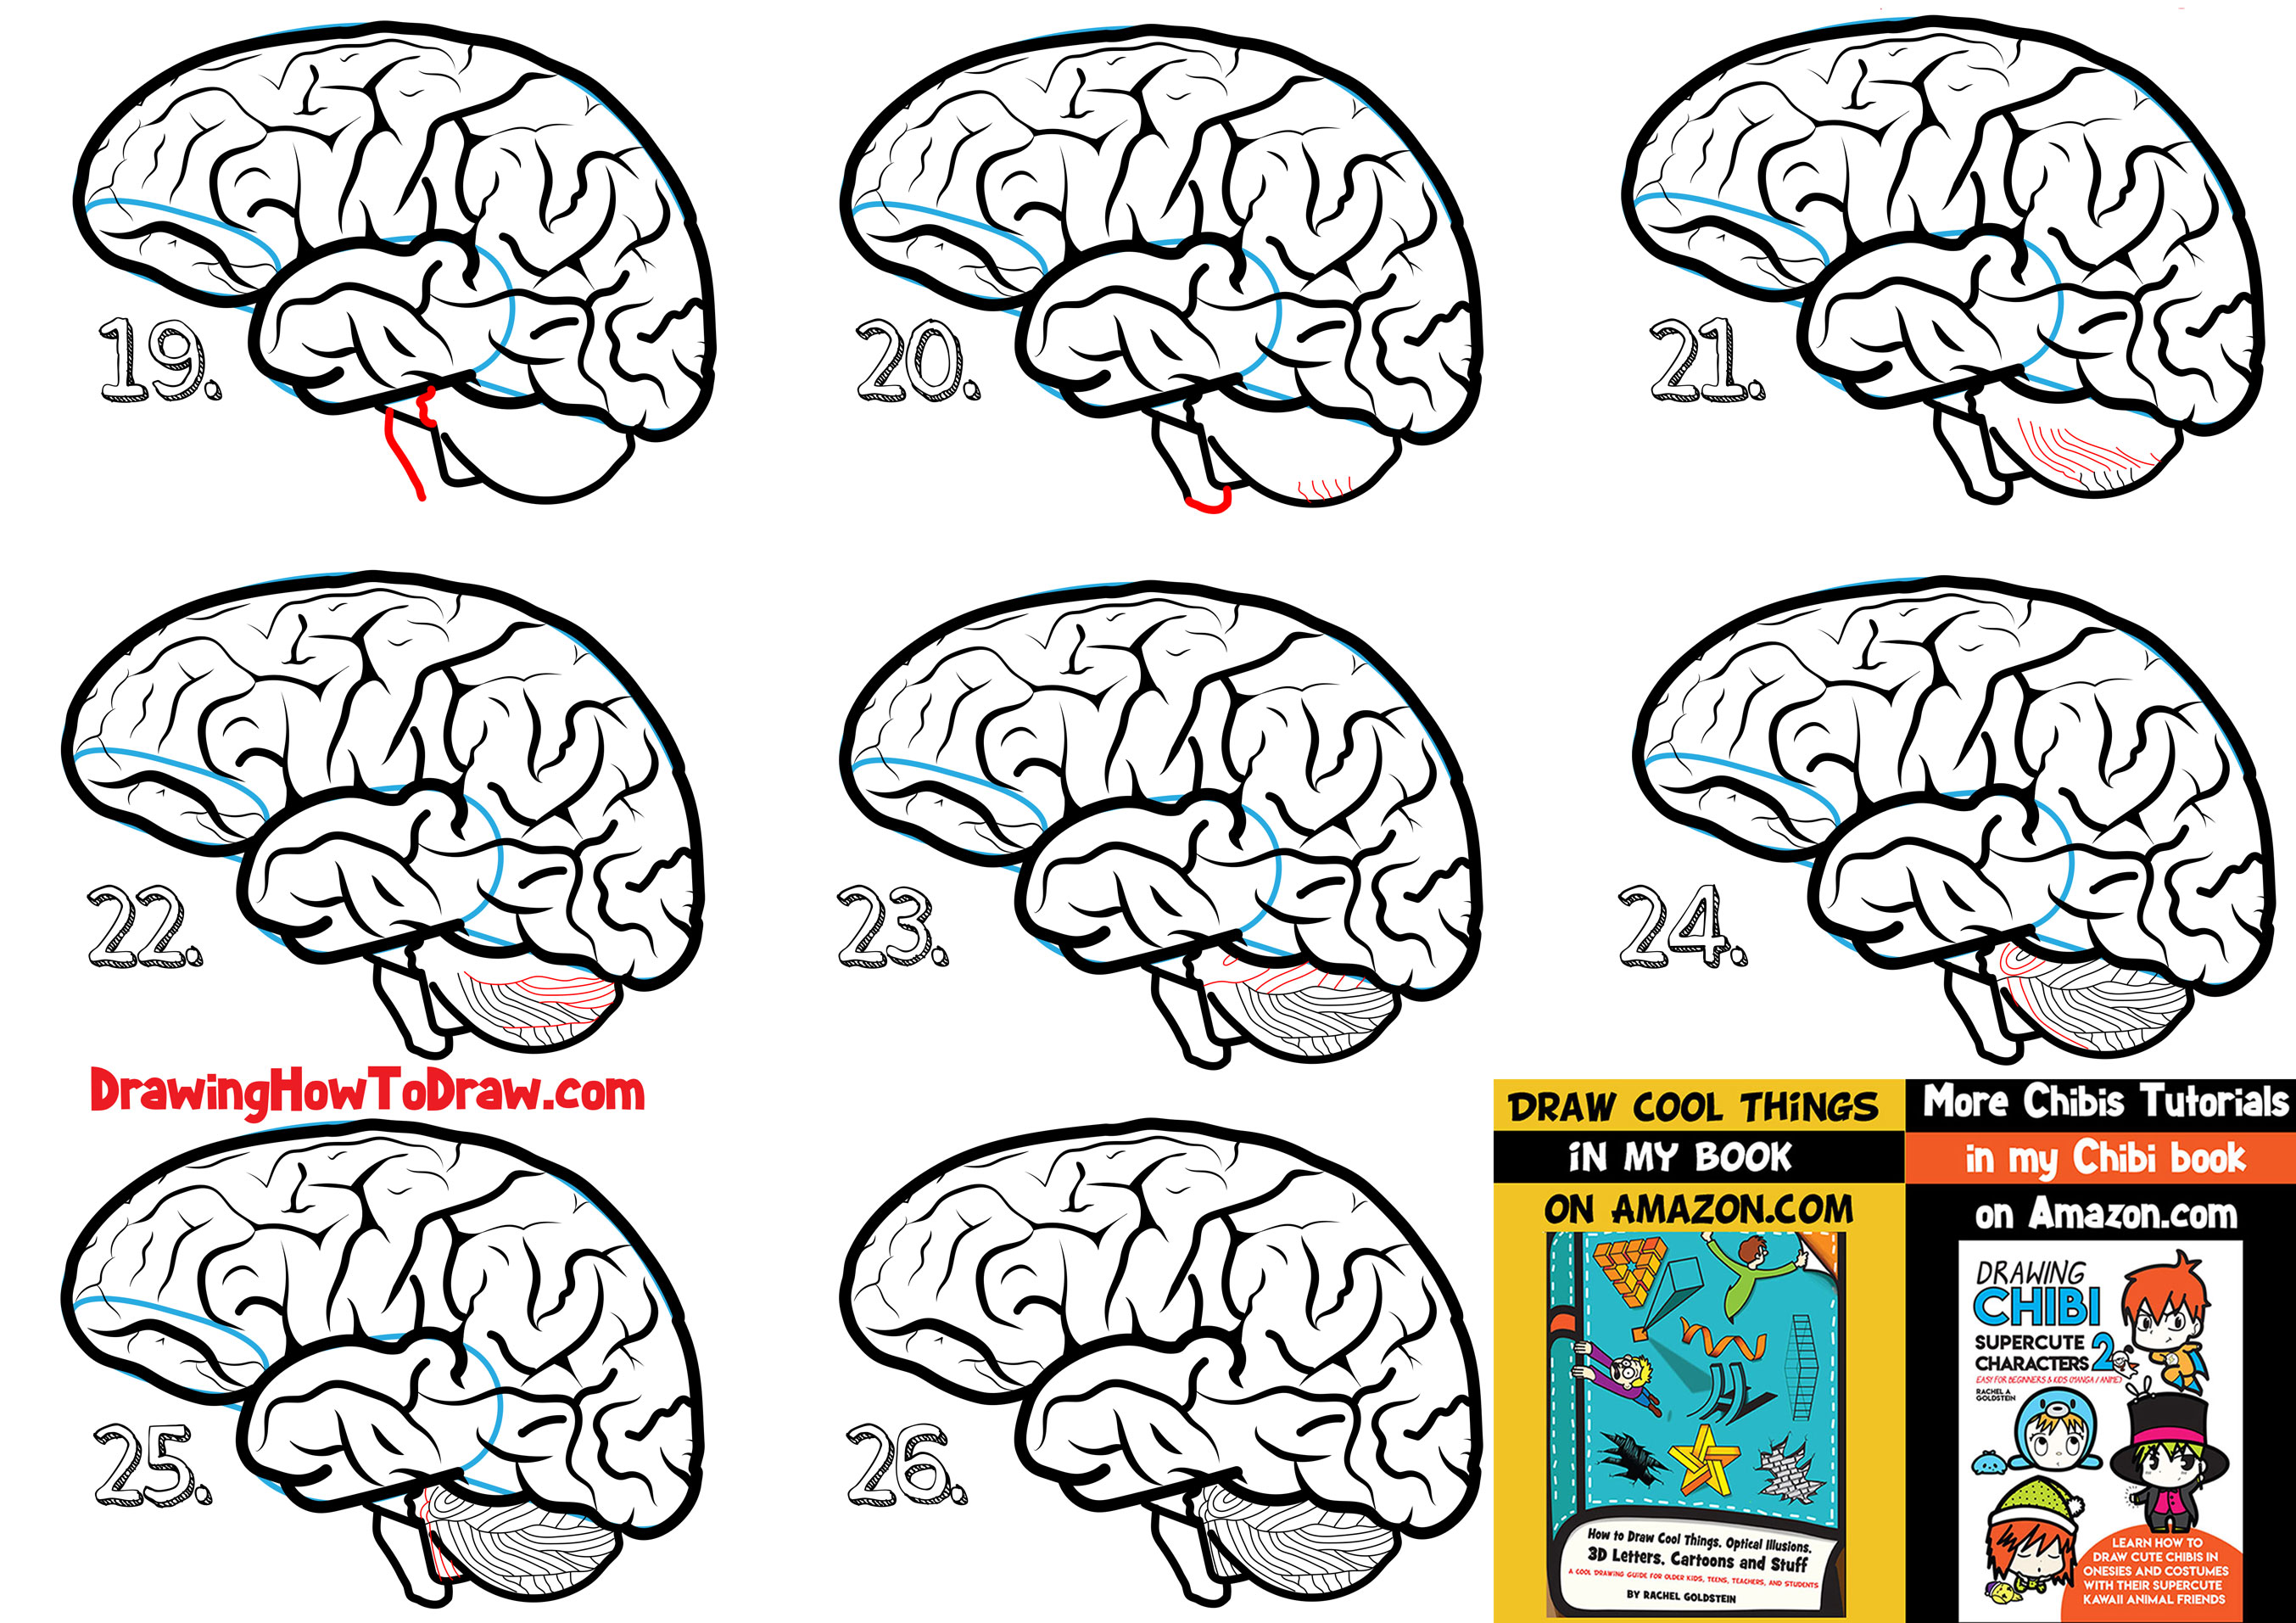 How to Draw a Human Brain - Easy Steps Drawing Lesson for Beginners